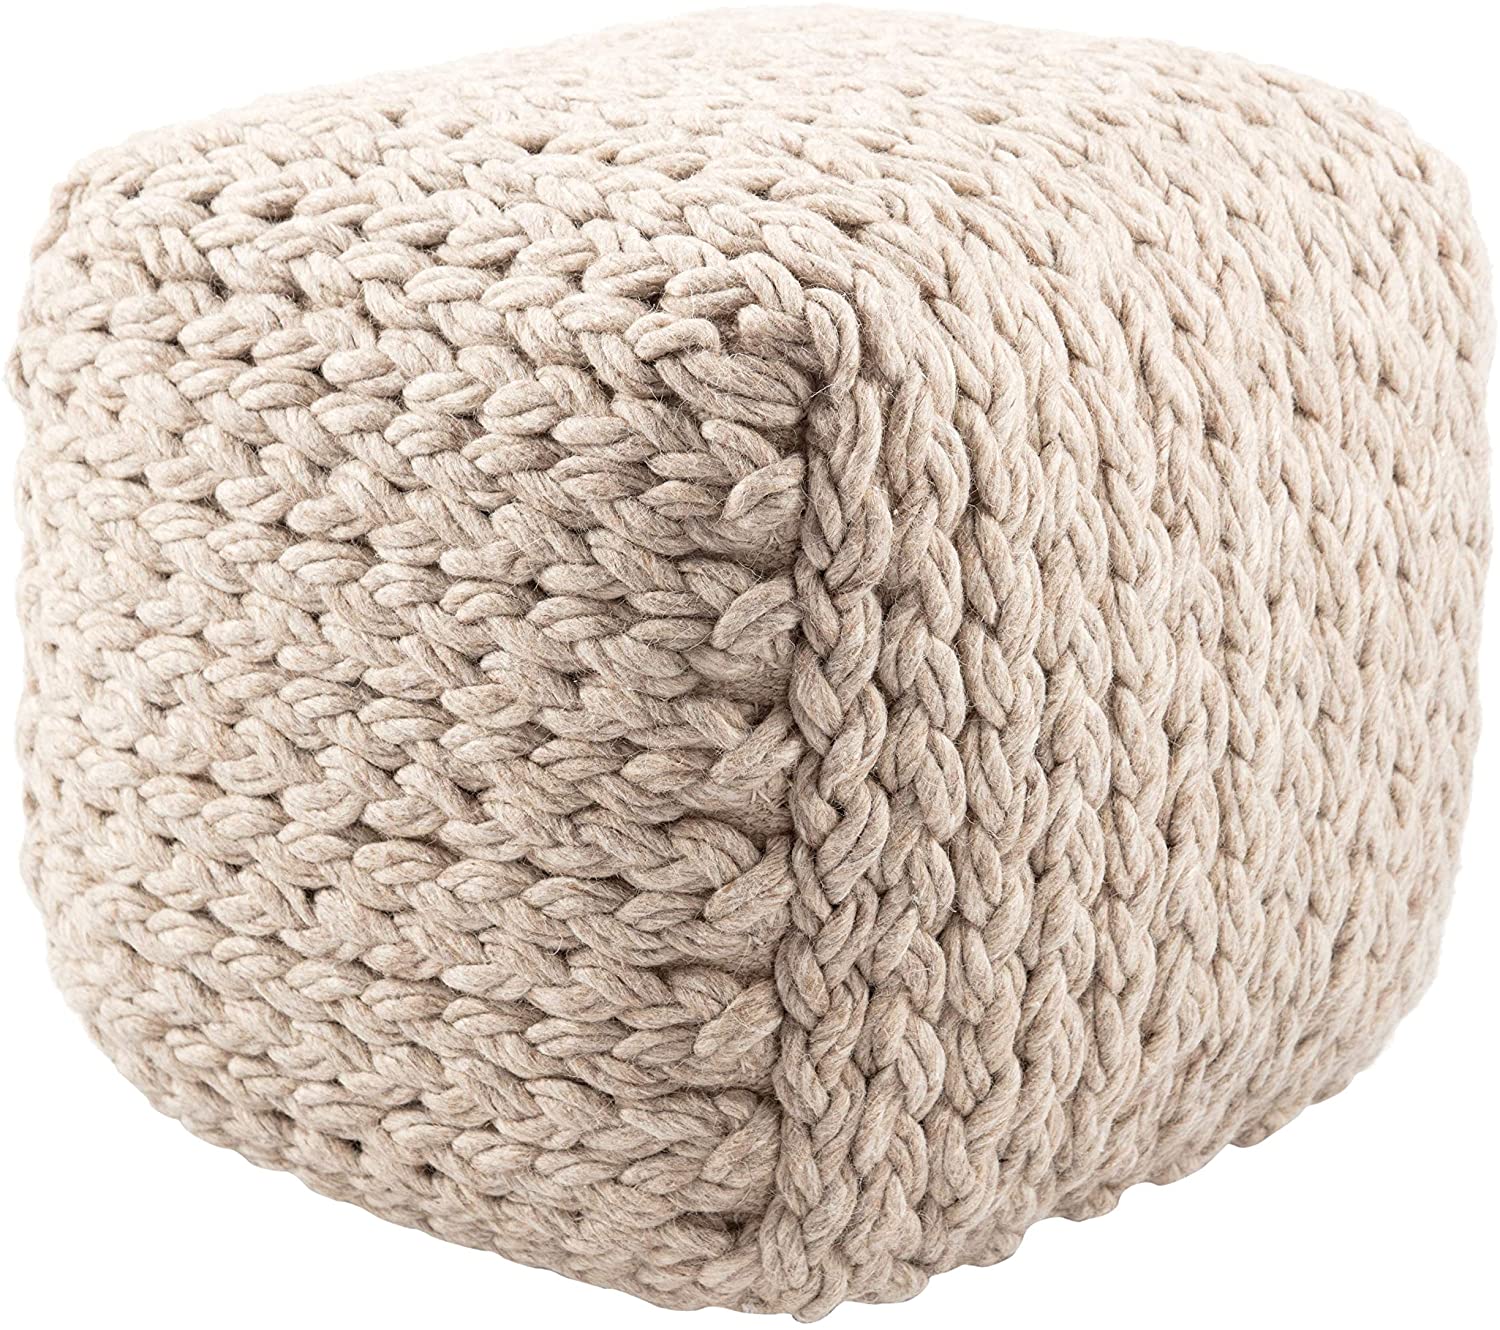 Unknown1 Cream Textured Square Pouf Ivory Scandinavian Synthetic Fiber Single